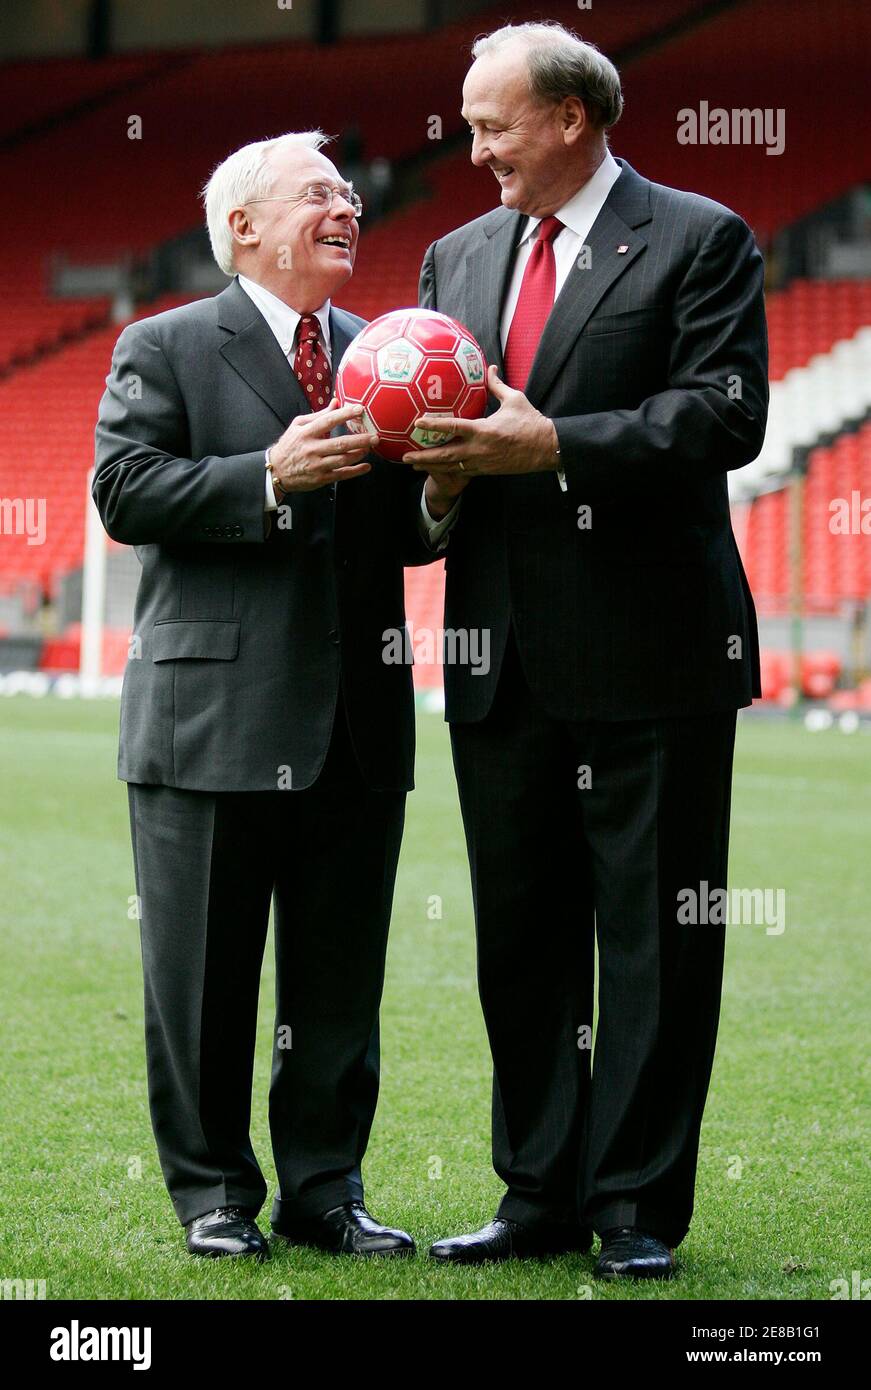 Liverpool Football Club's new owners George Gillett (L) and Tom Hicks pose  for photographers in front of the club's Kop stand at Anfield in Liverpool,  northern England February 6, 2007. English Premier